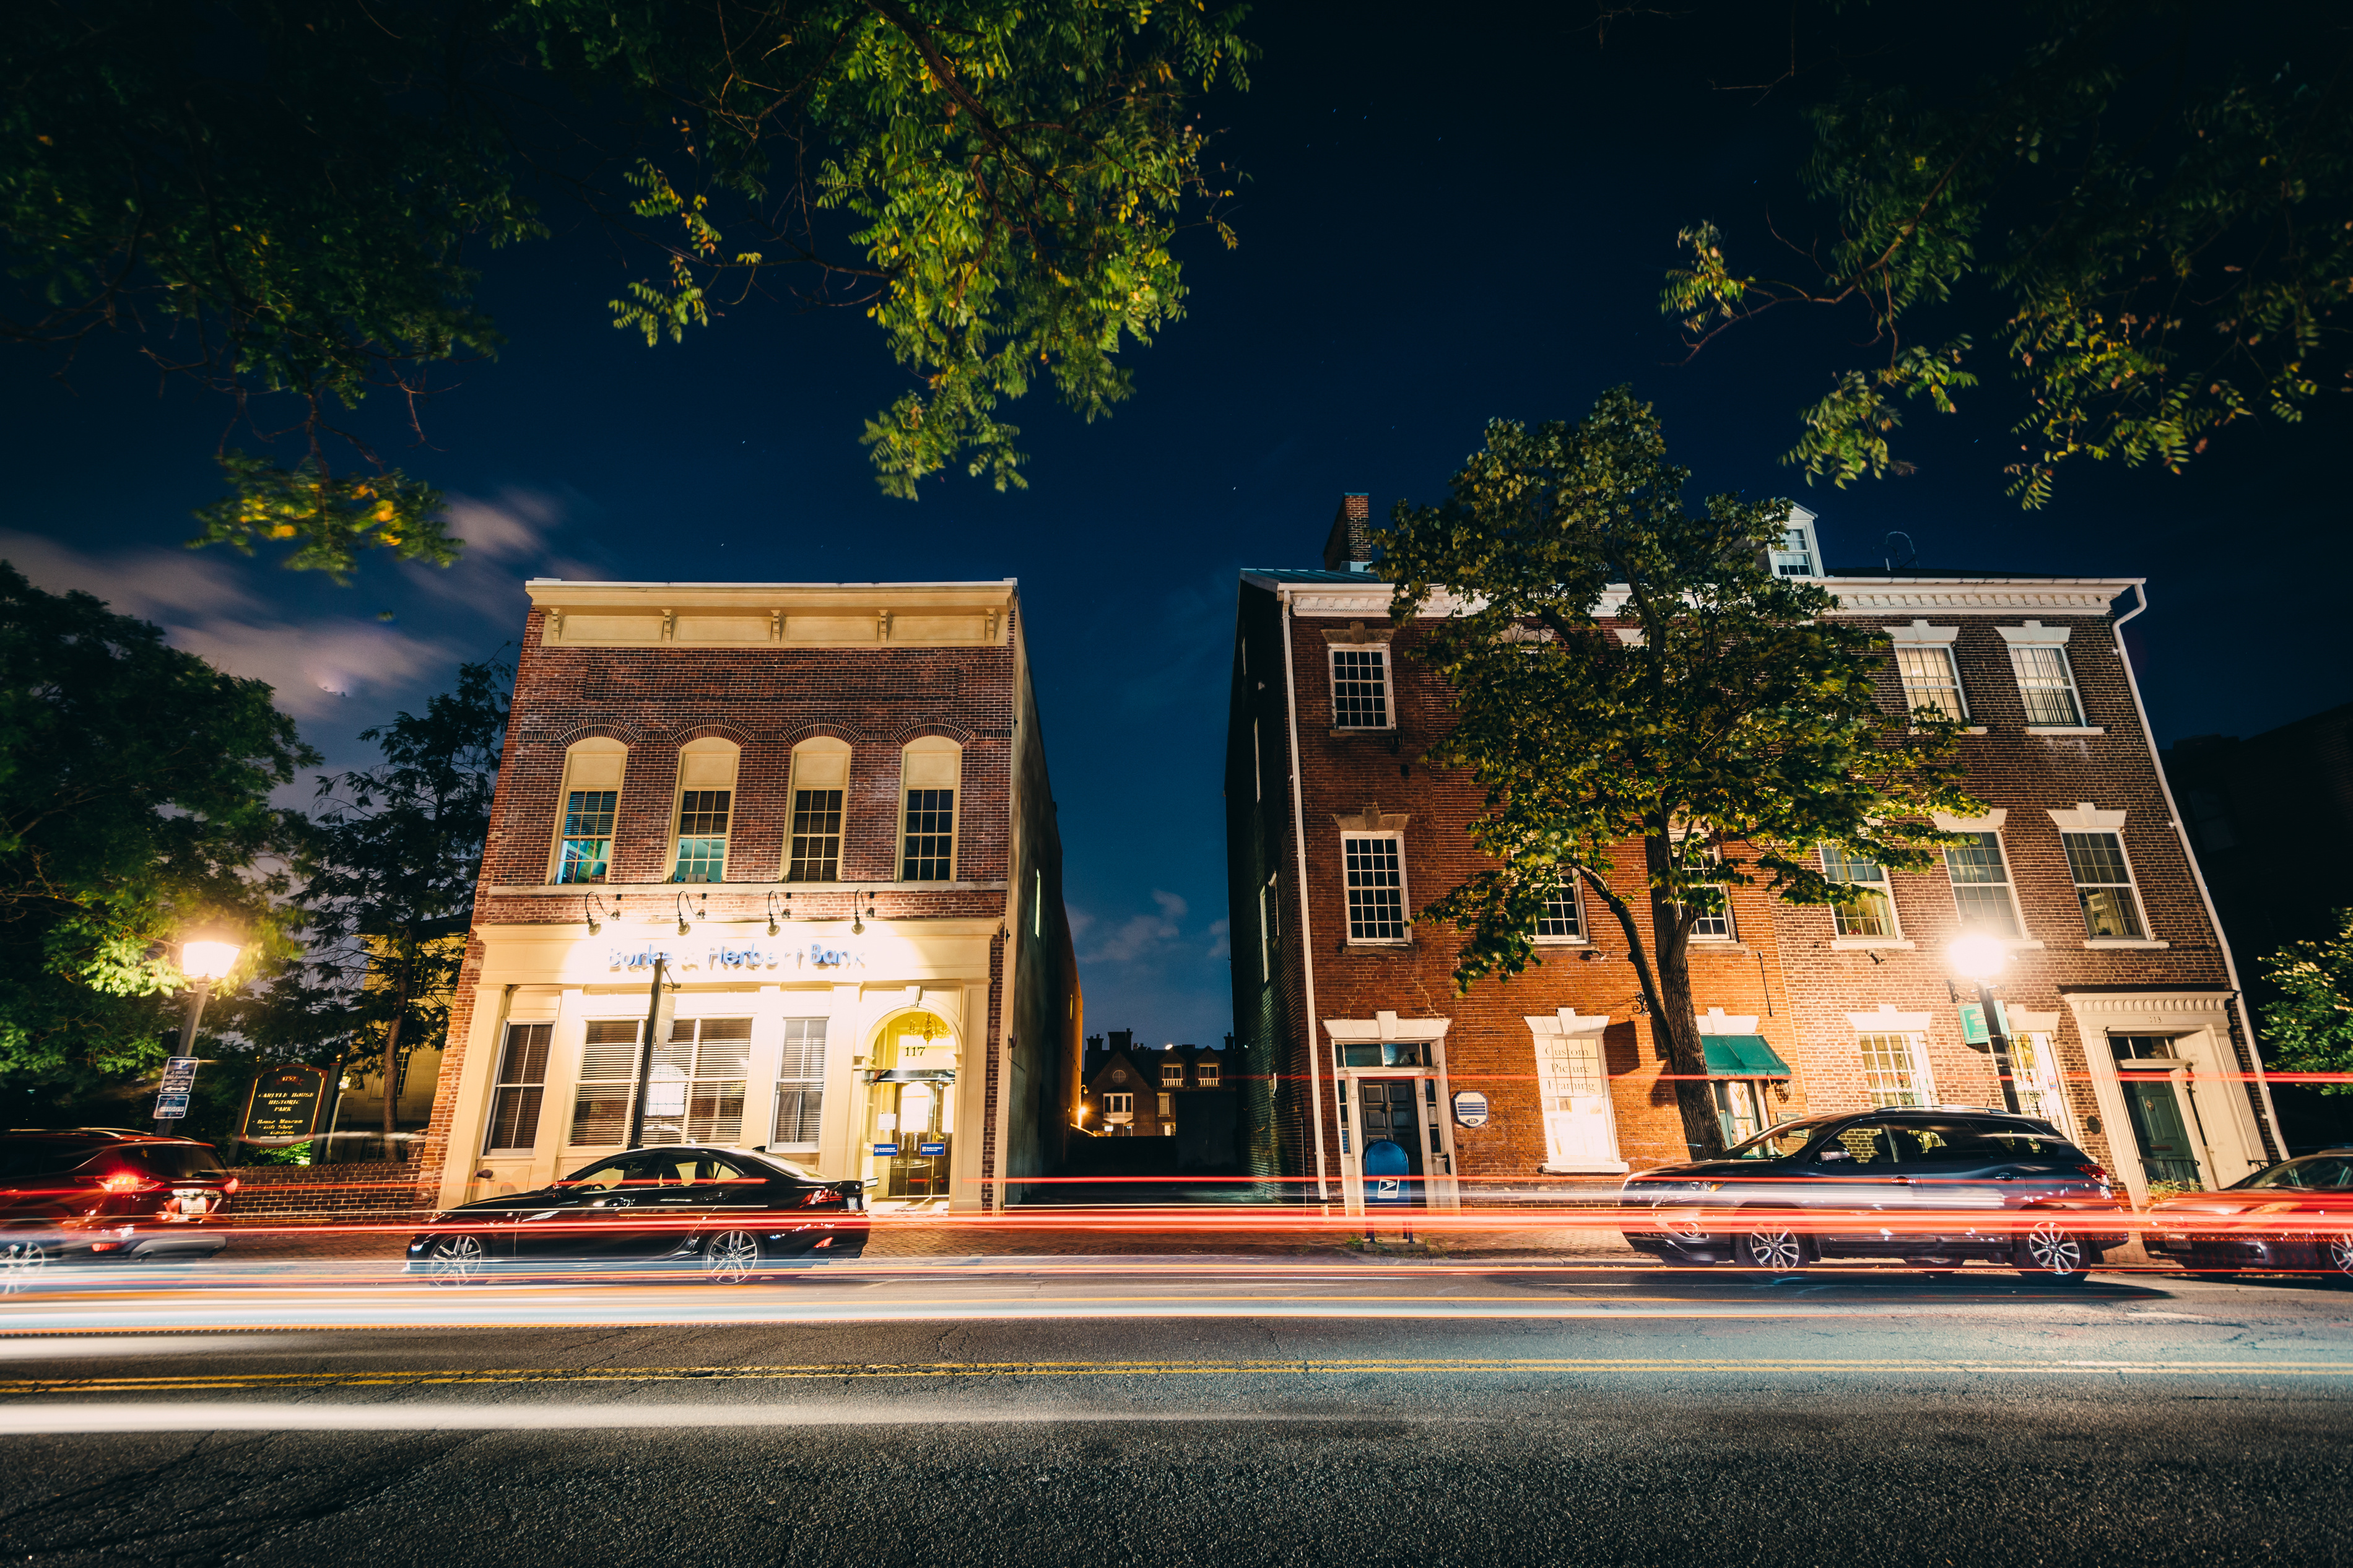 Buildings on Fairfax Street at night, in the Old Town of Alexandria, VA